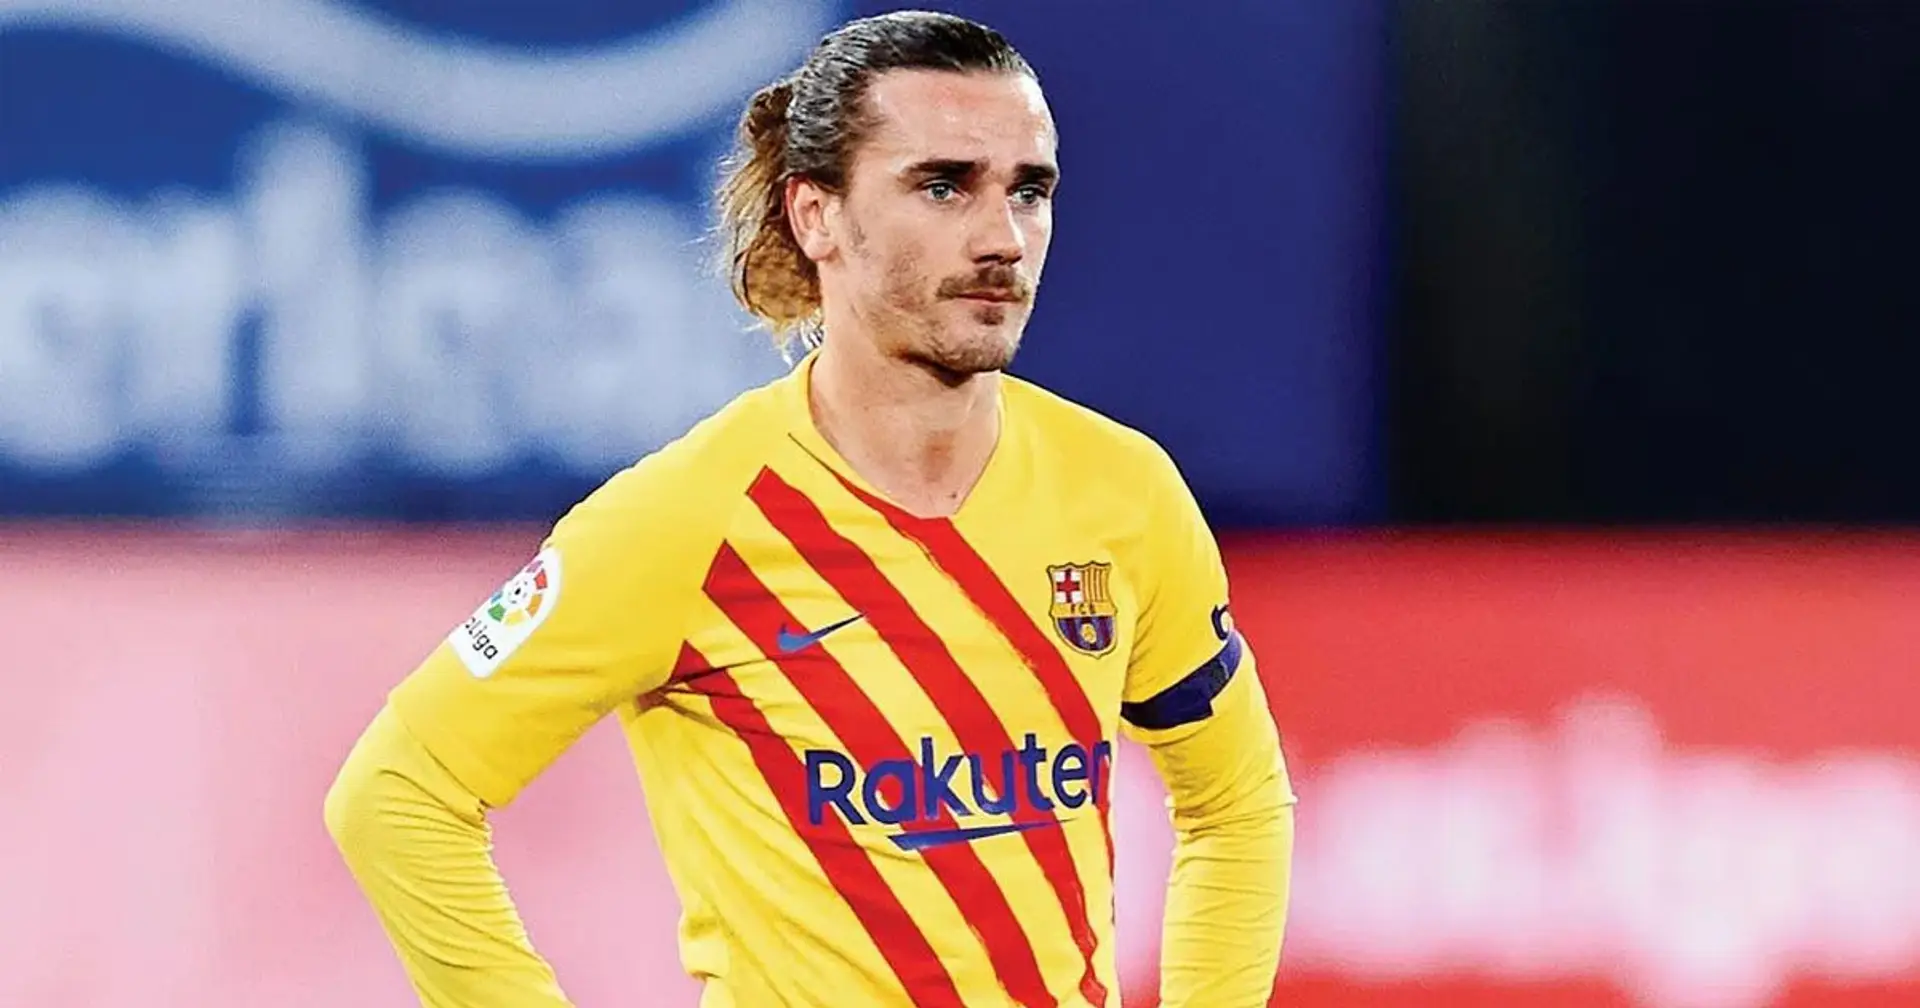 ‘Shies away from the ball yet has goals/assist stats only behind Messi & Lewandowski’: Barca fan expels myth about Griezmann's poor form